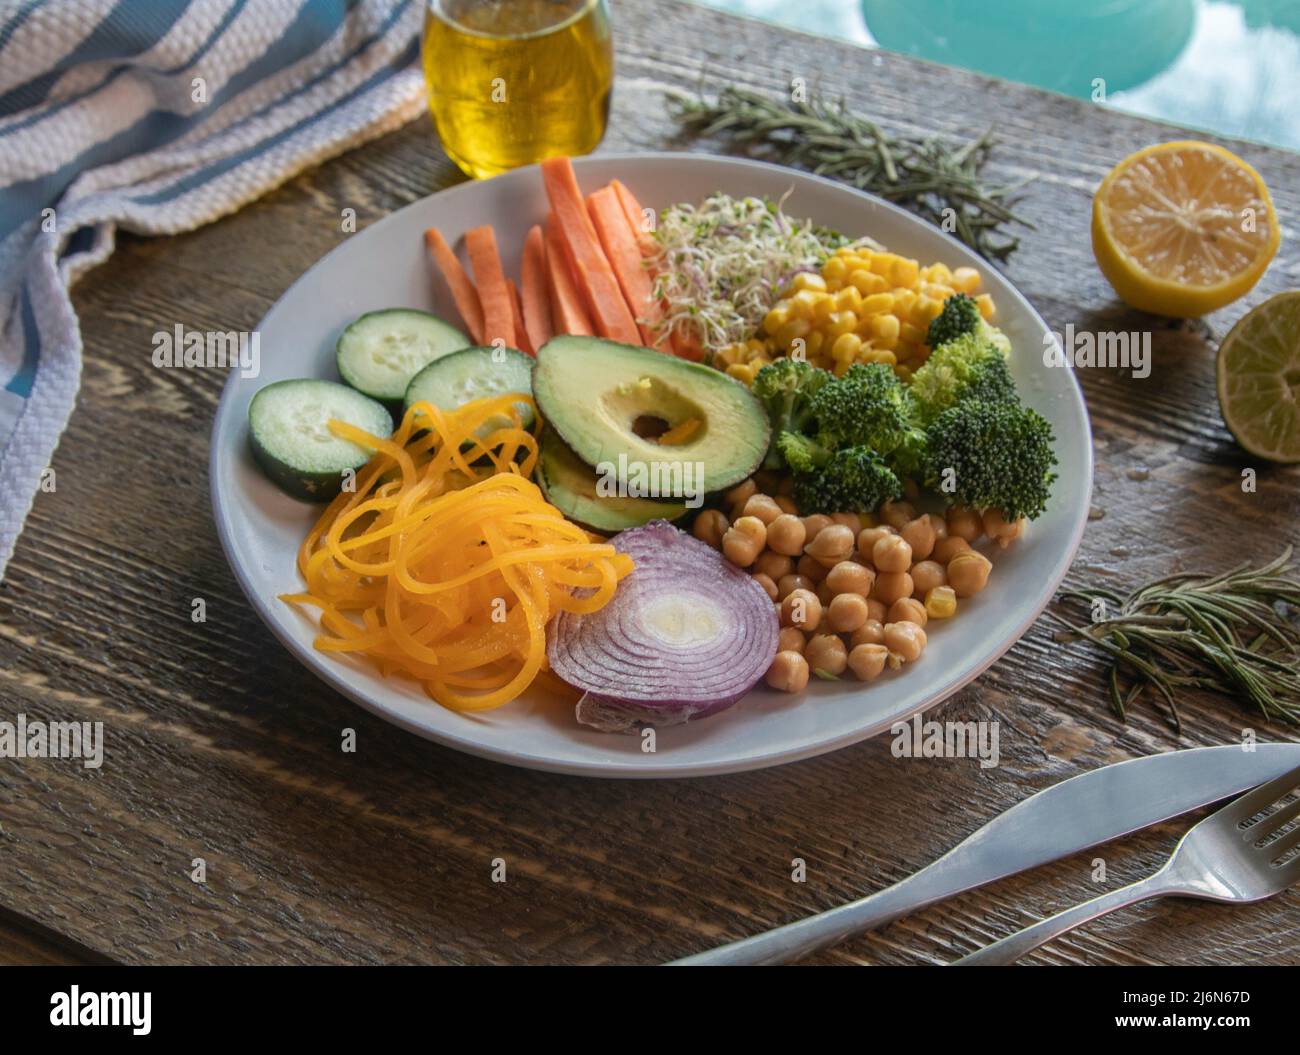 Top view of Veggie Bowl on Natural wood Table. Stock Photo